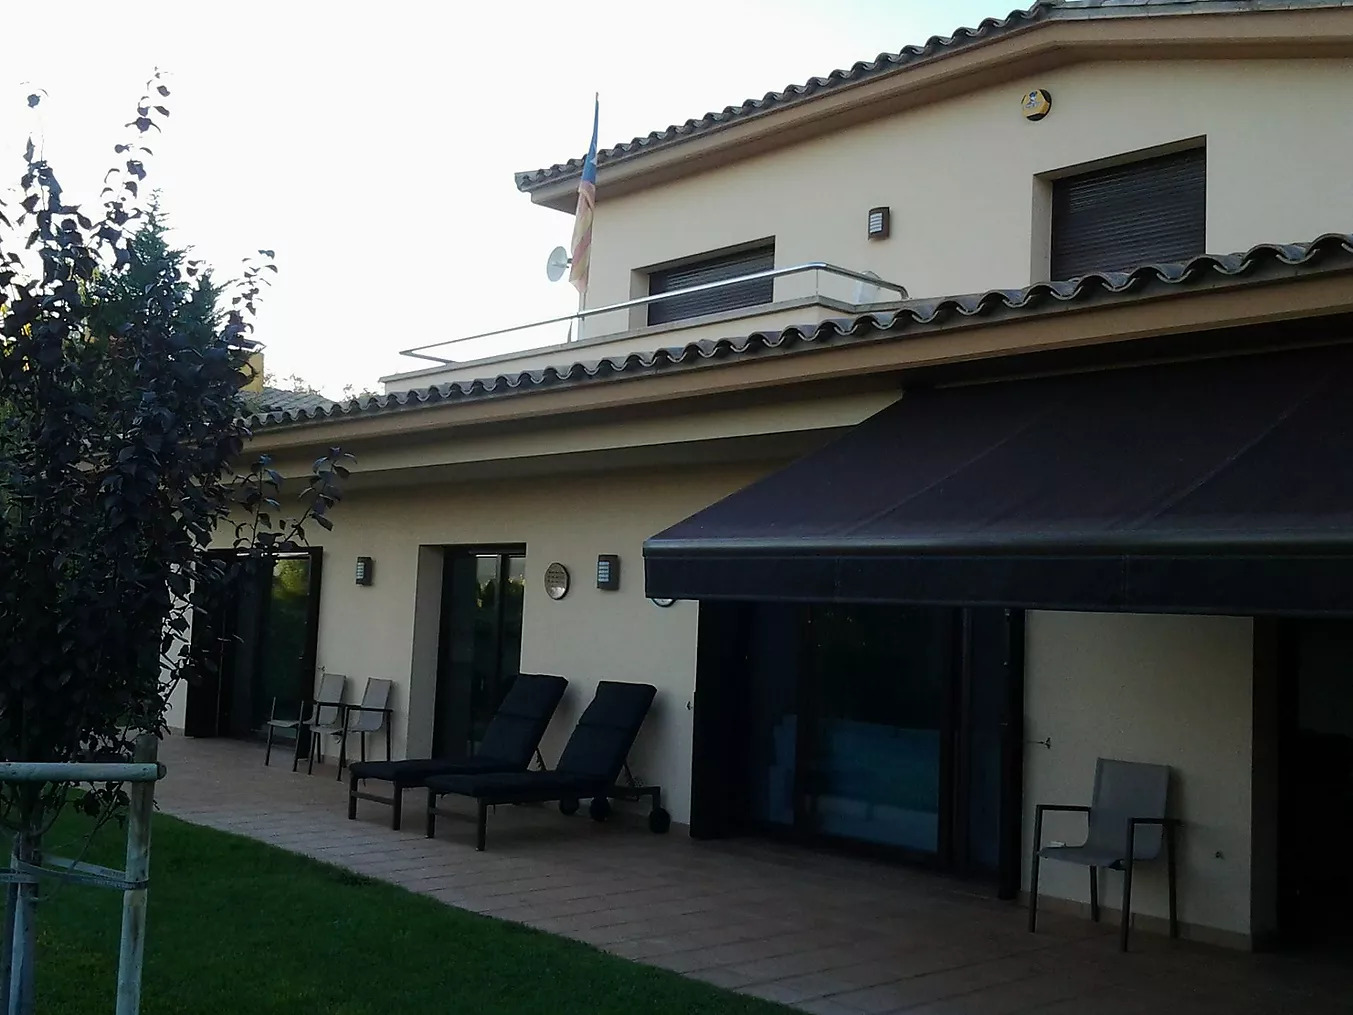 Townhouse for sale in Guardamar and surroundings 17